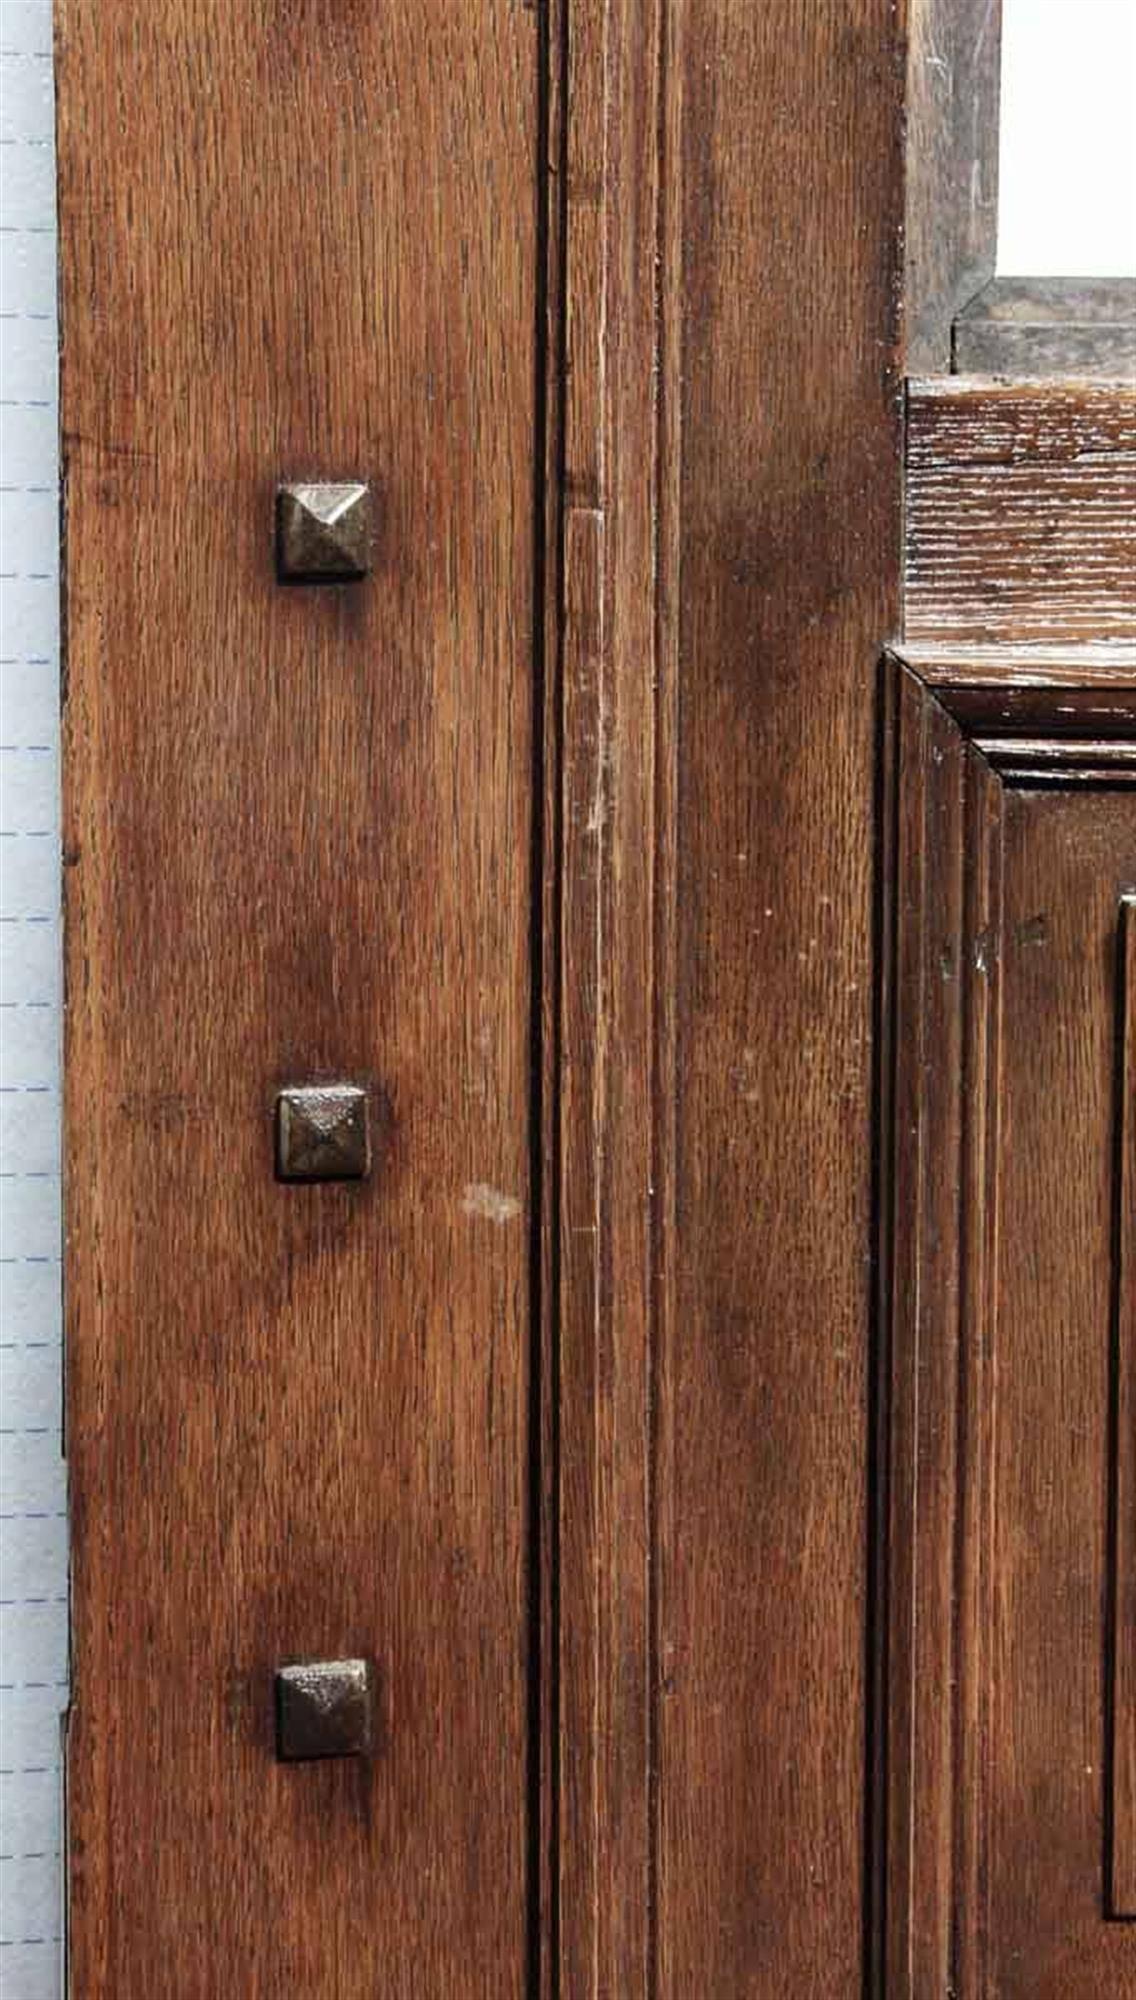 This is an especially interesting door! It's wide and made of quarter sawn oak on one side of the door and a different wood on the other side of the door. The original bronze ornate door hardware is still intact on one side as well as the original